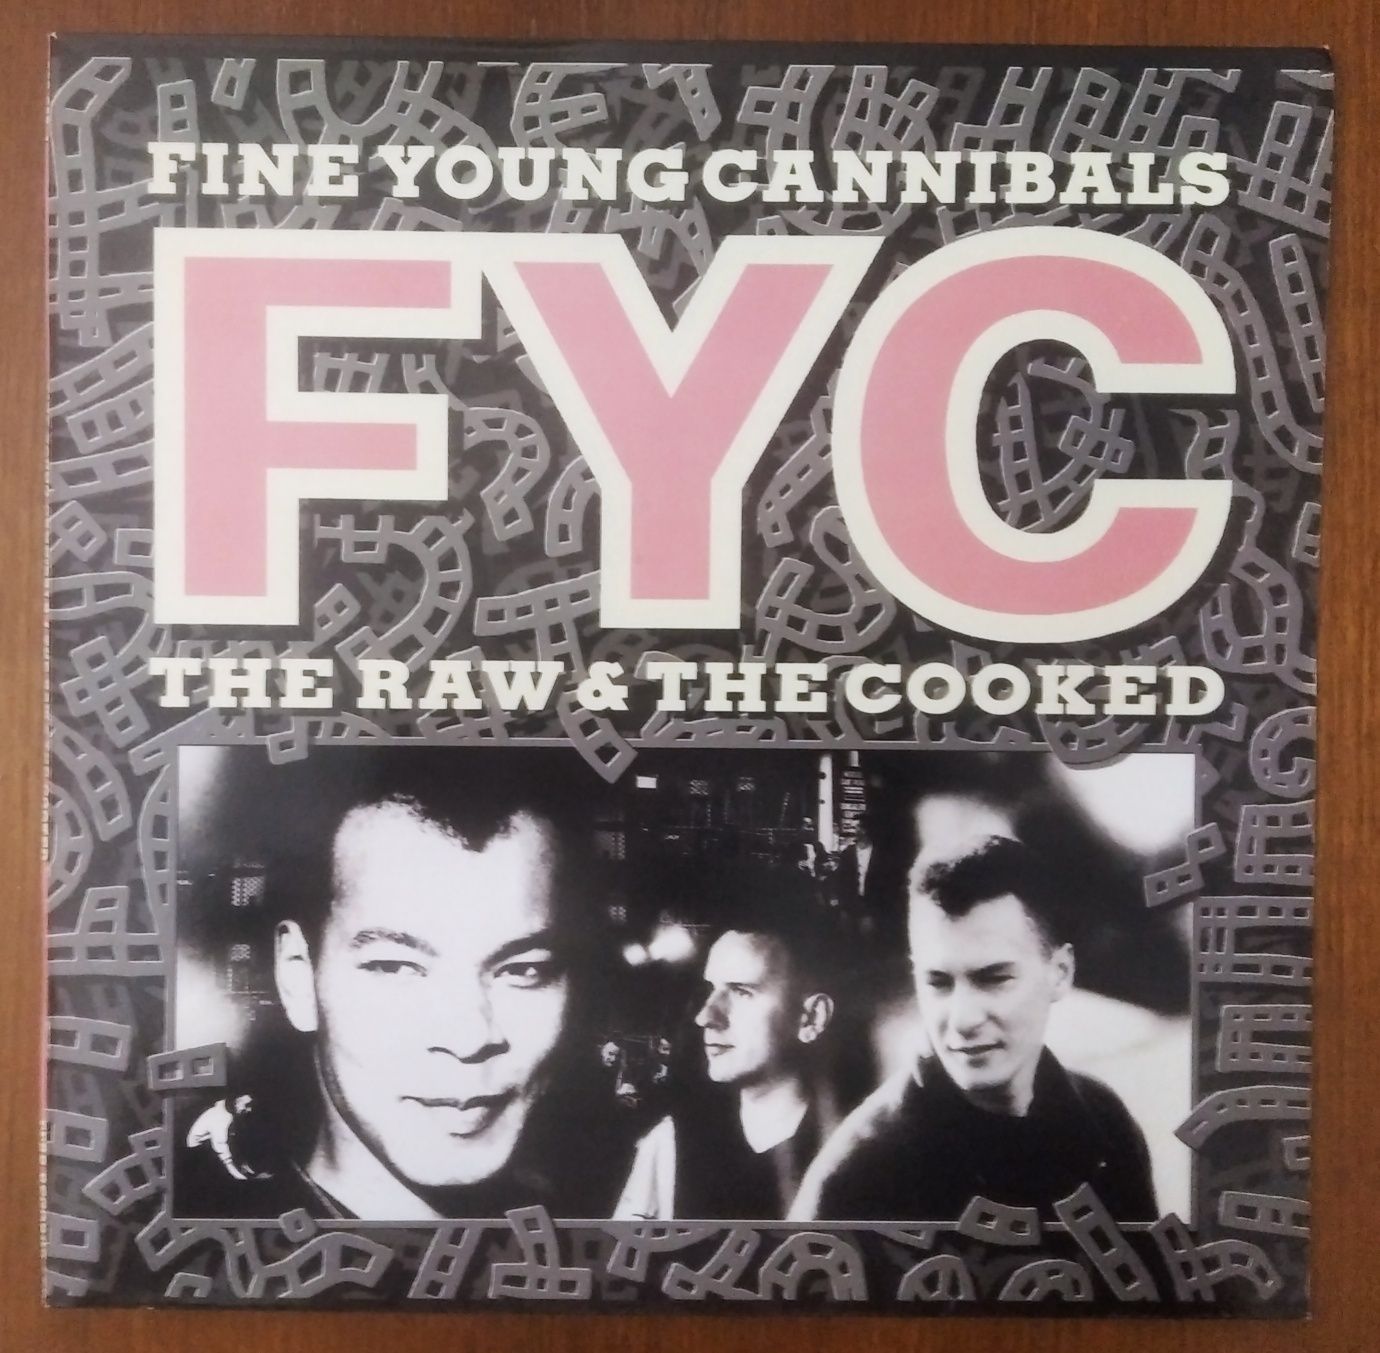 Fine Young Cannibals disco de vinil "The Raw & The Cooked "